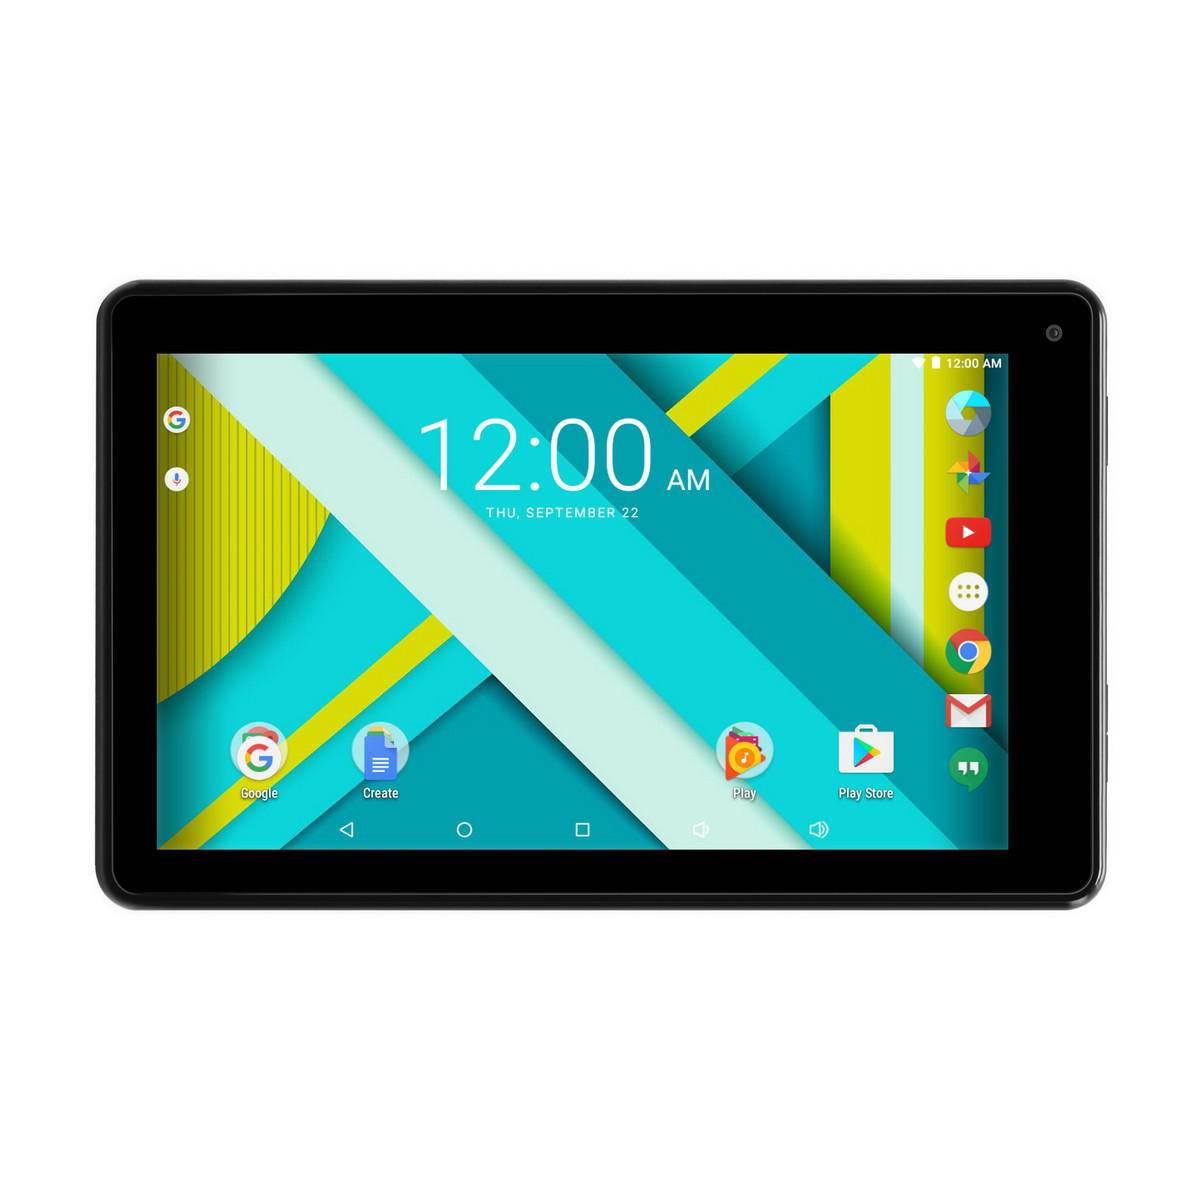 Inexpensive RCA Voyager III tablet now shipping for just $50 USD - NotebookCheck.net News1200 x 1200